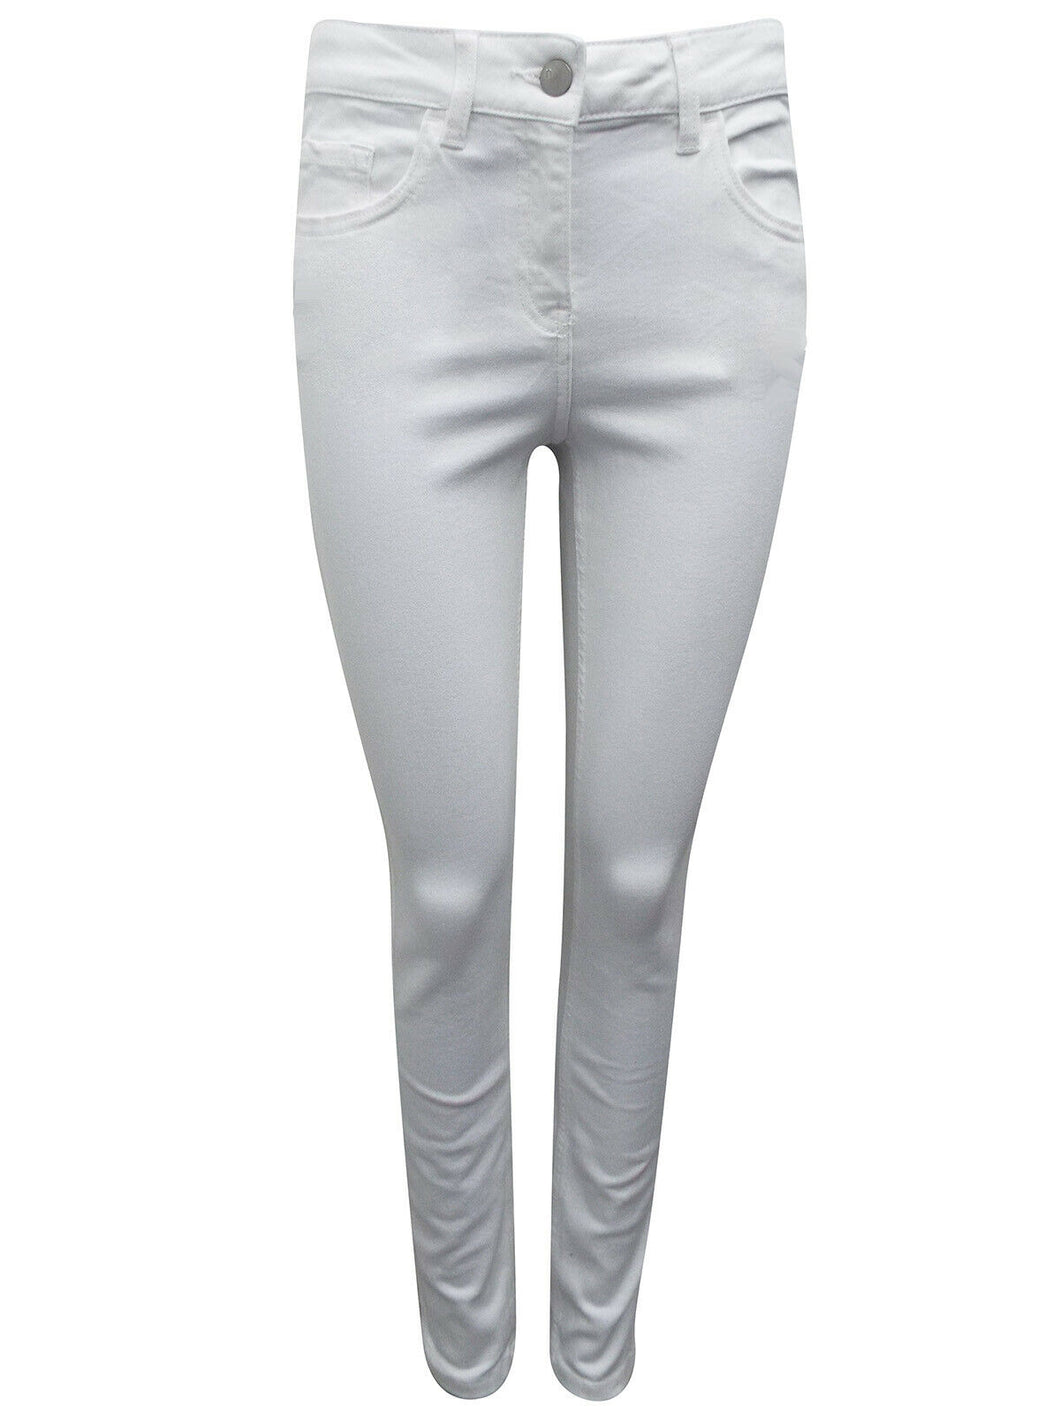 Ladies White Mid Rise Cotton Rich Skinny Jeans